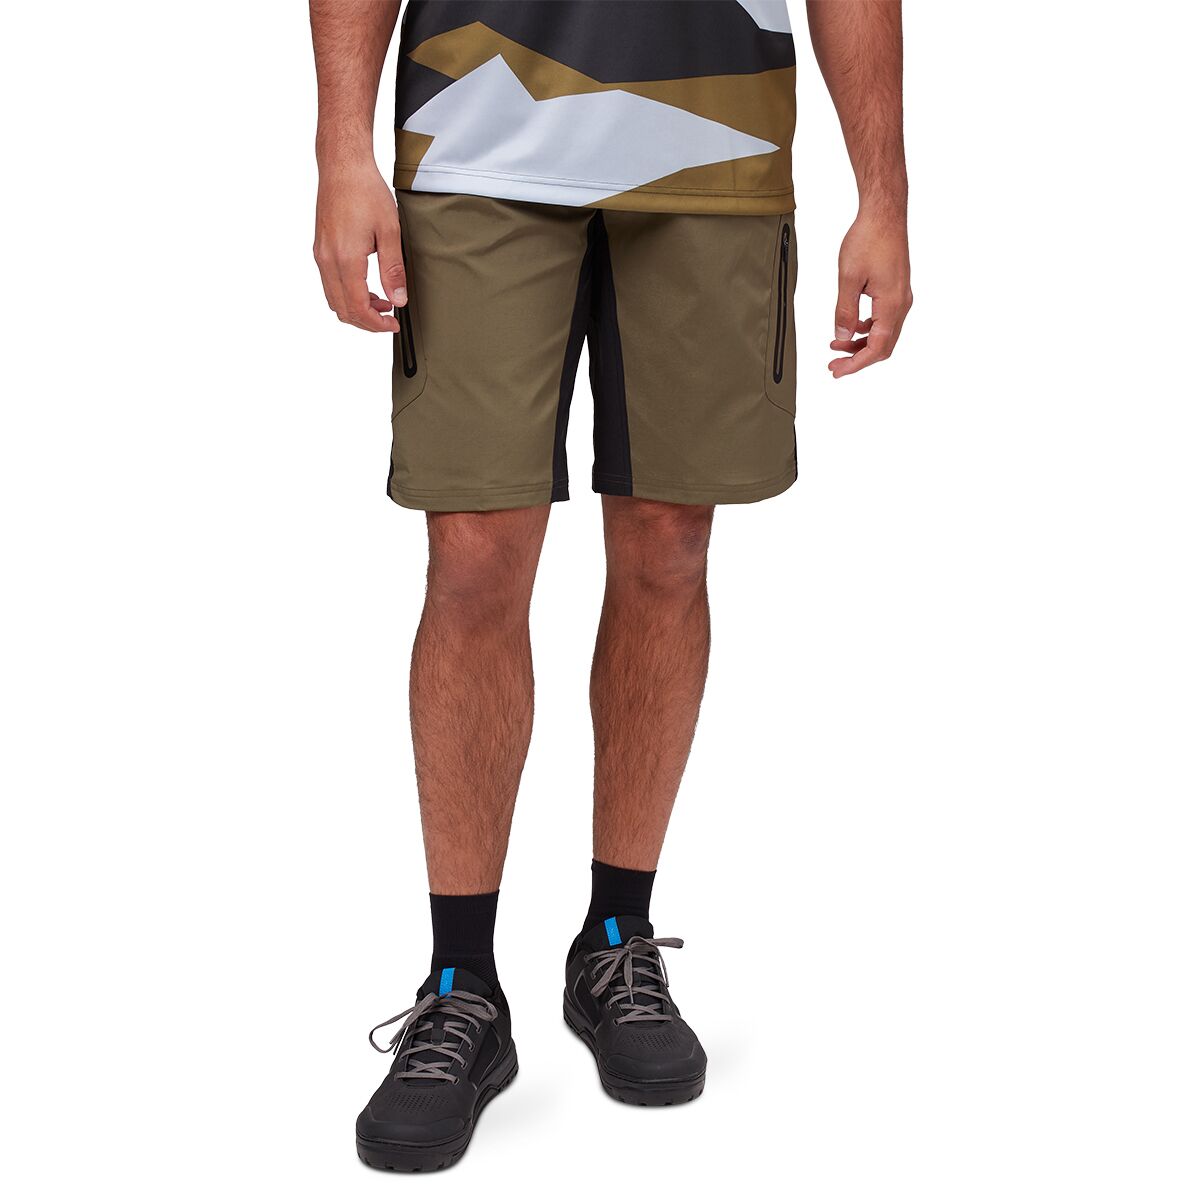 ZOIC Ether Shorts + Essential Liner - Men's